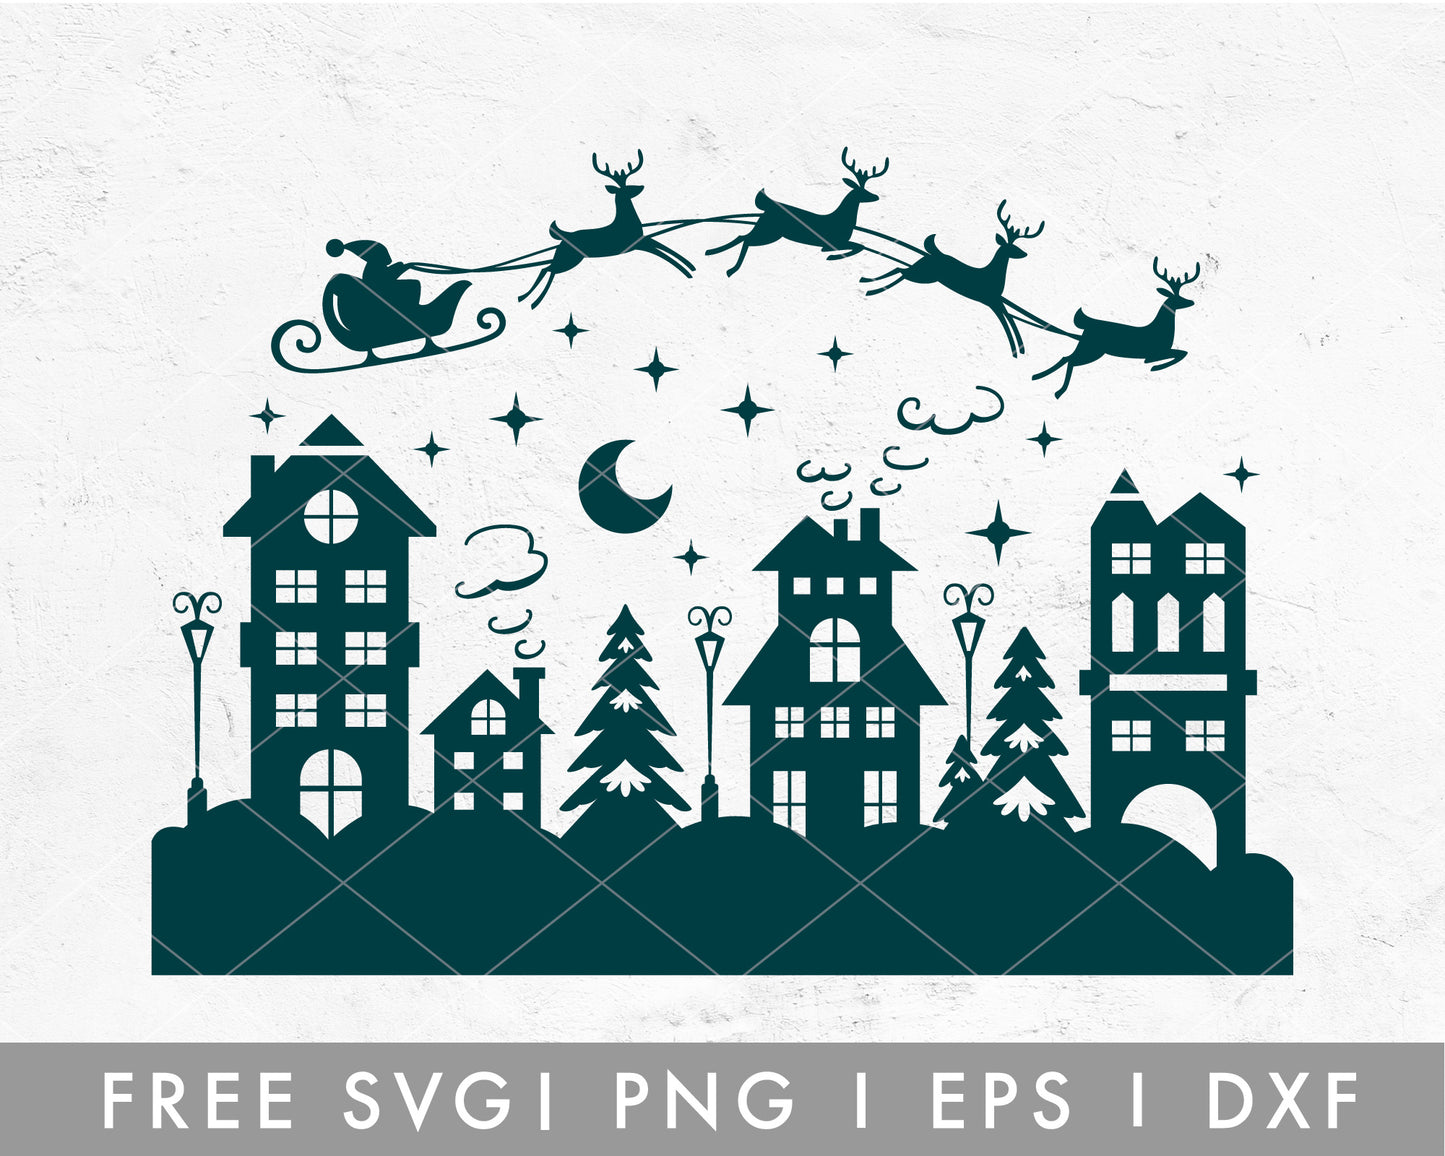 Best Gift Ever SVG, Christmas Svg, Best Gift Ever Cut Files, Cricut,  Silhouette, Png, Svg, Eps, Dxf (Download Now) 